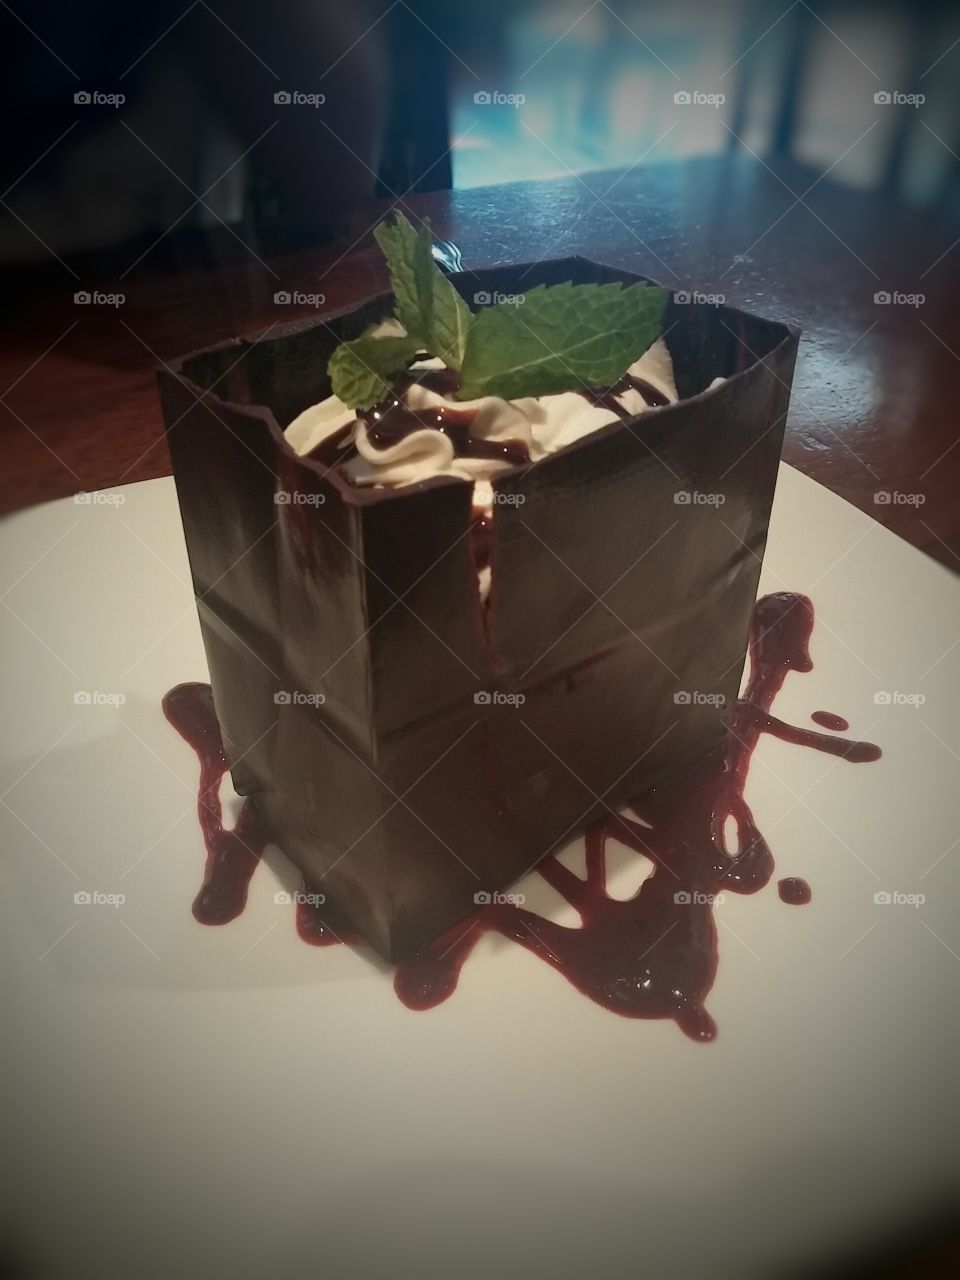 Chocolate Bag. Walls of chocolate that forms a bag filled with mousse and berries.